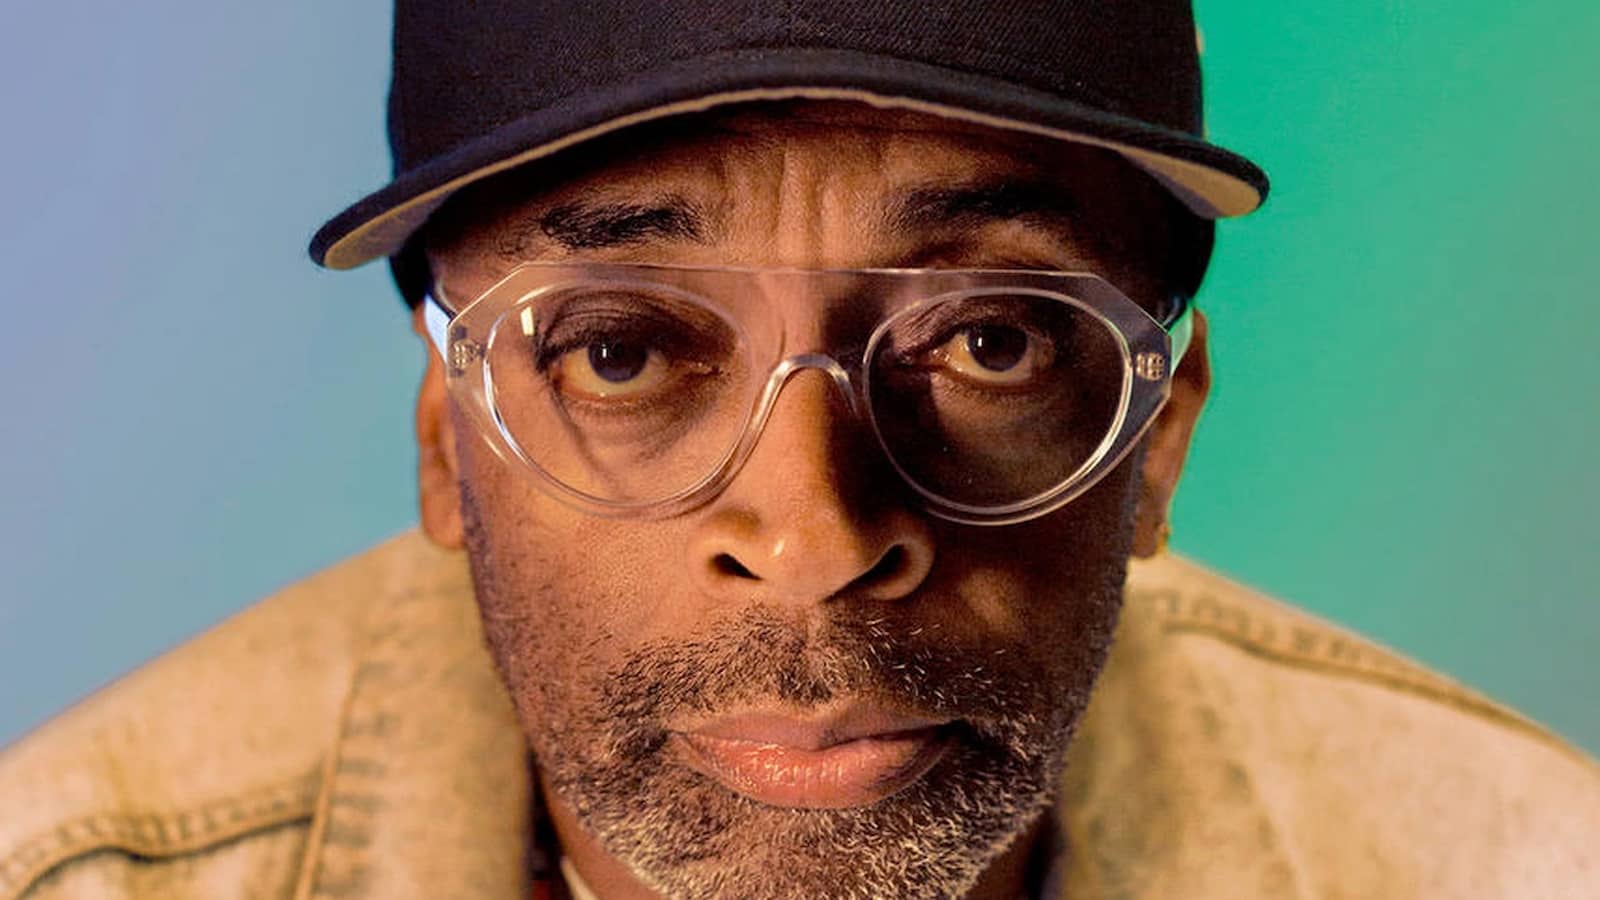 Spike Lee Biography: Age, Career, Family, Personal Life, and Net Worth